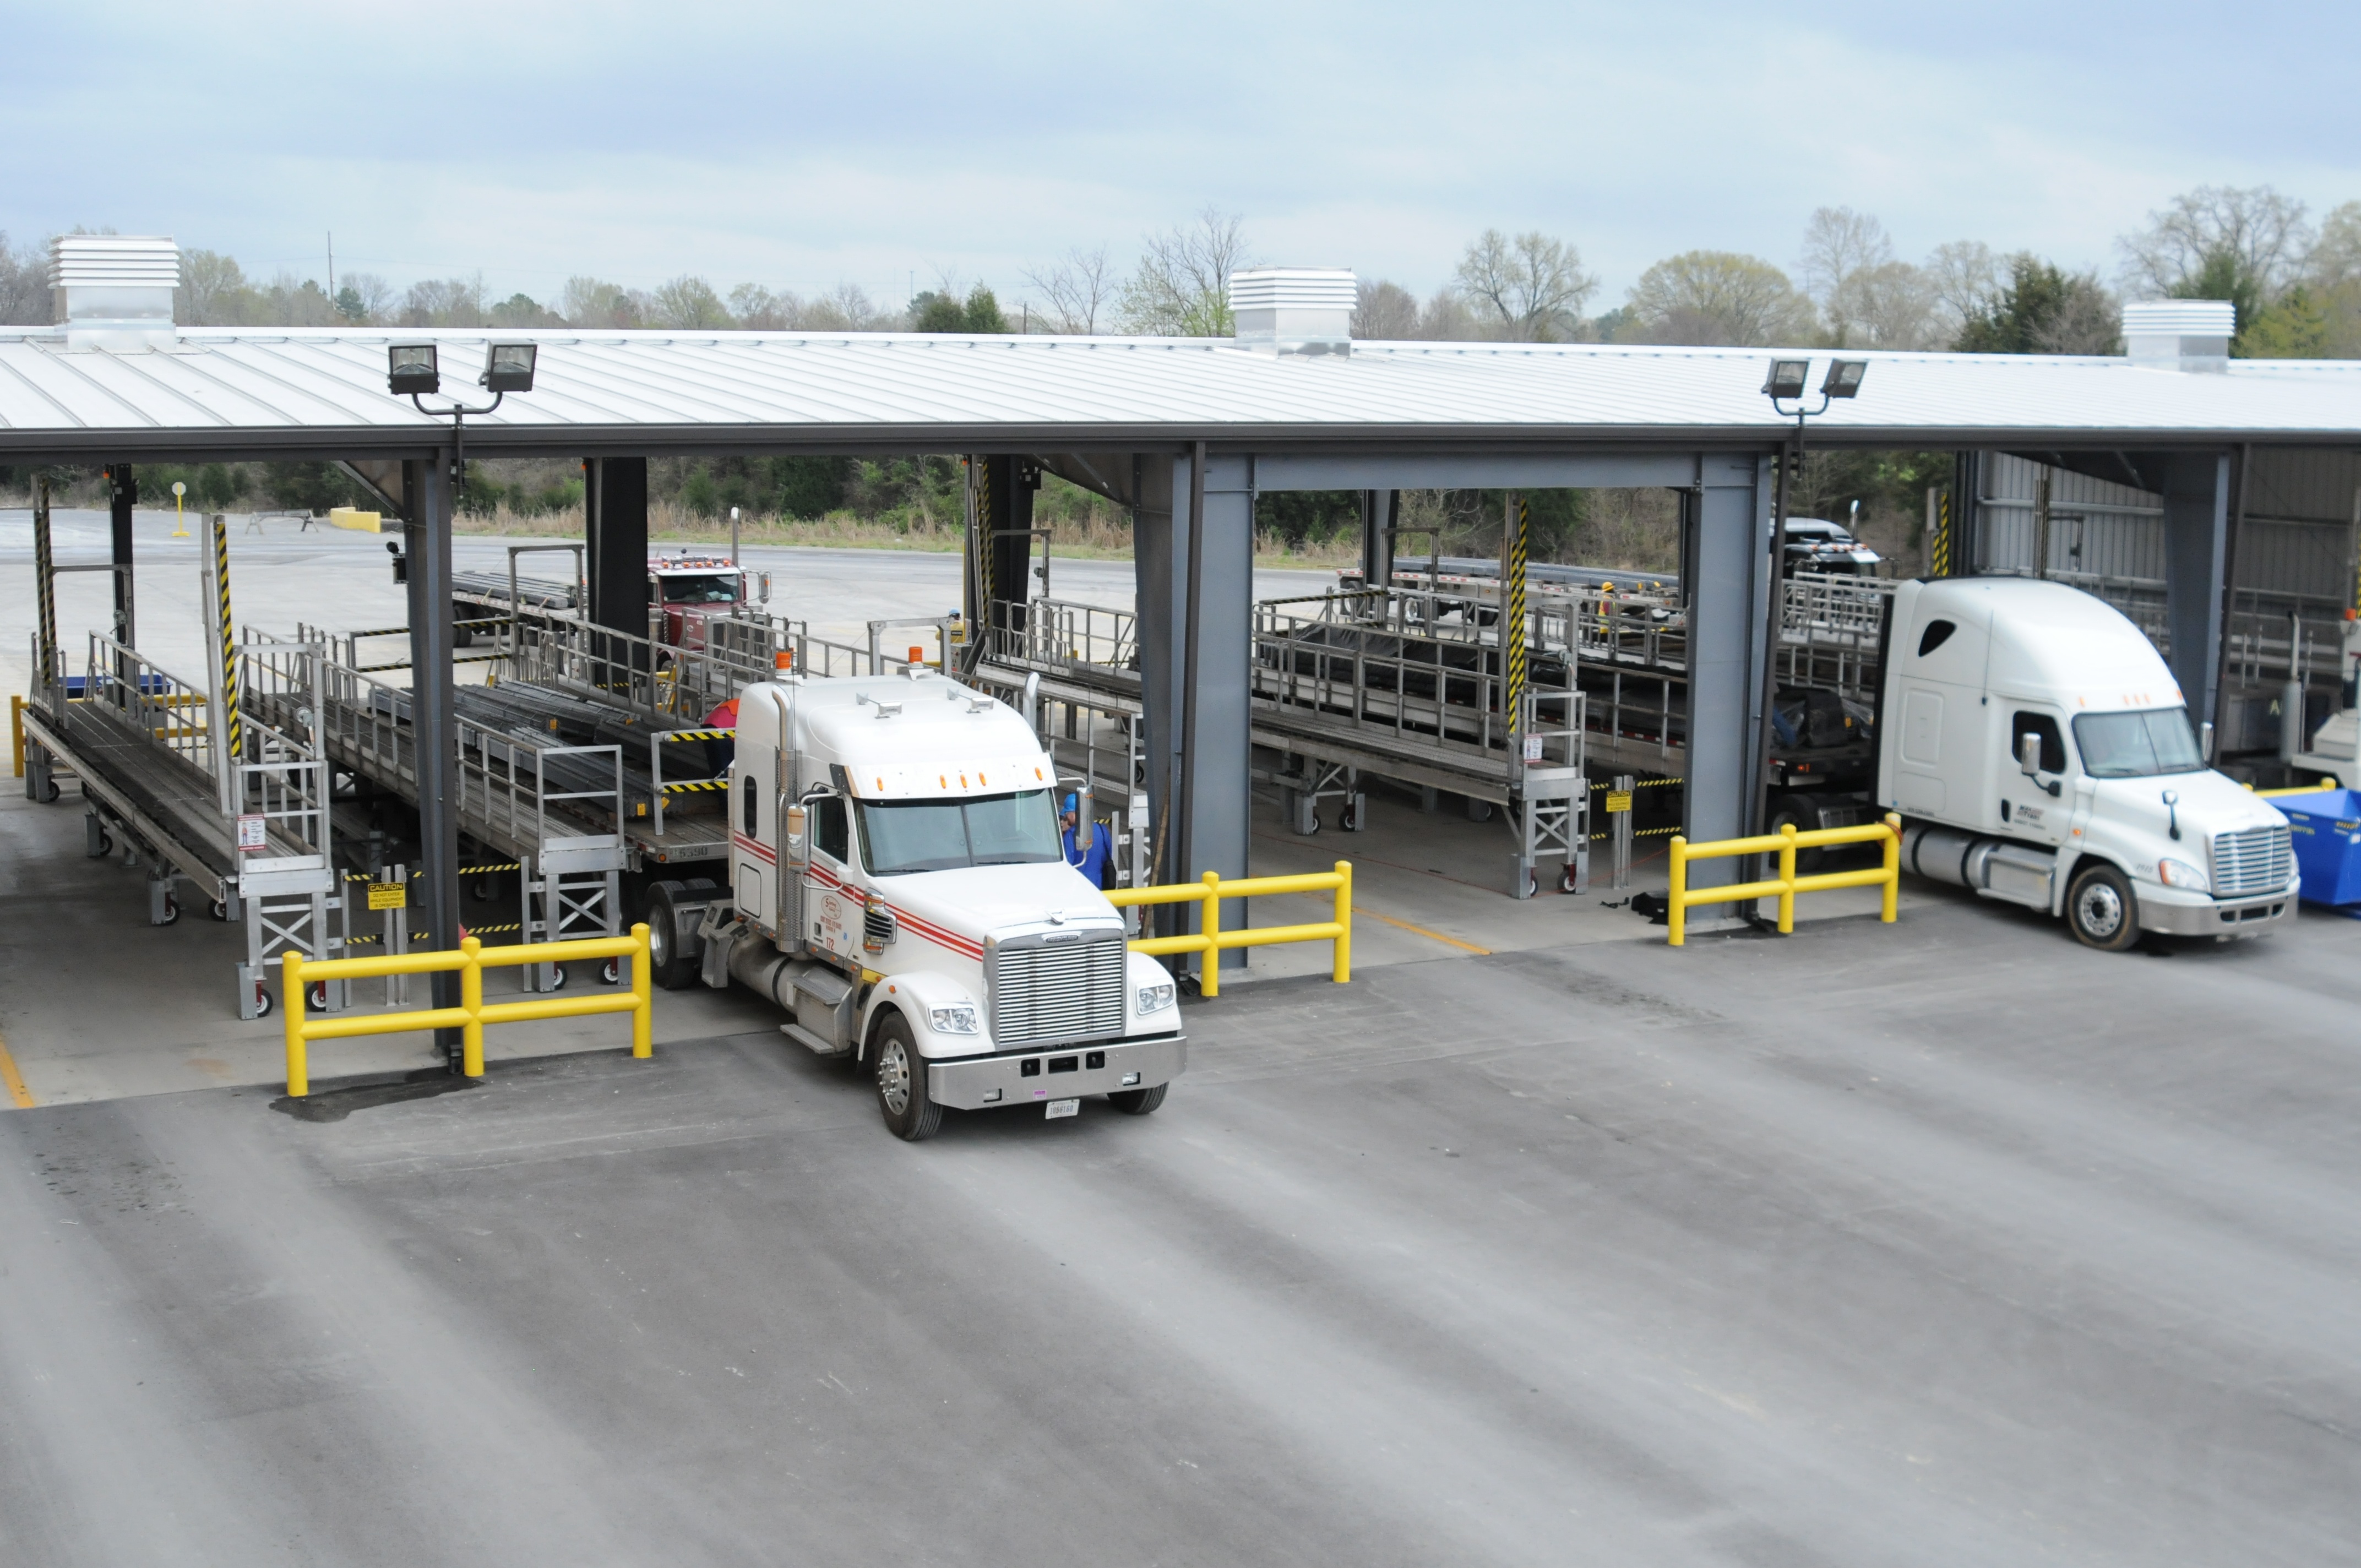 Discover three safety risks for flatbed truck operators.